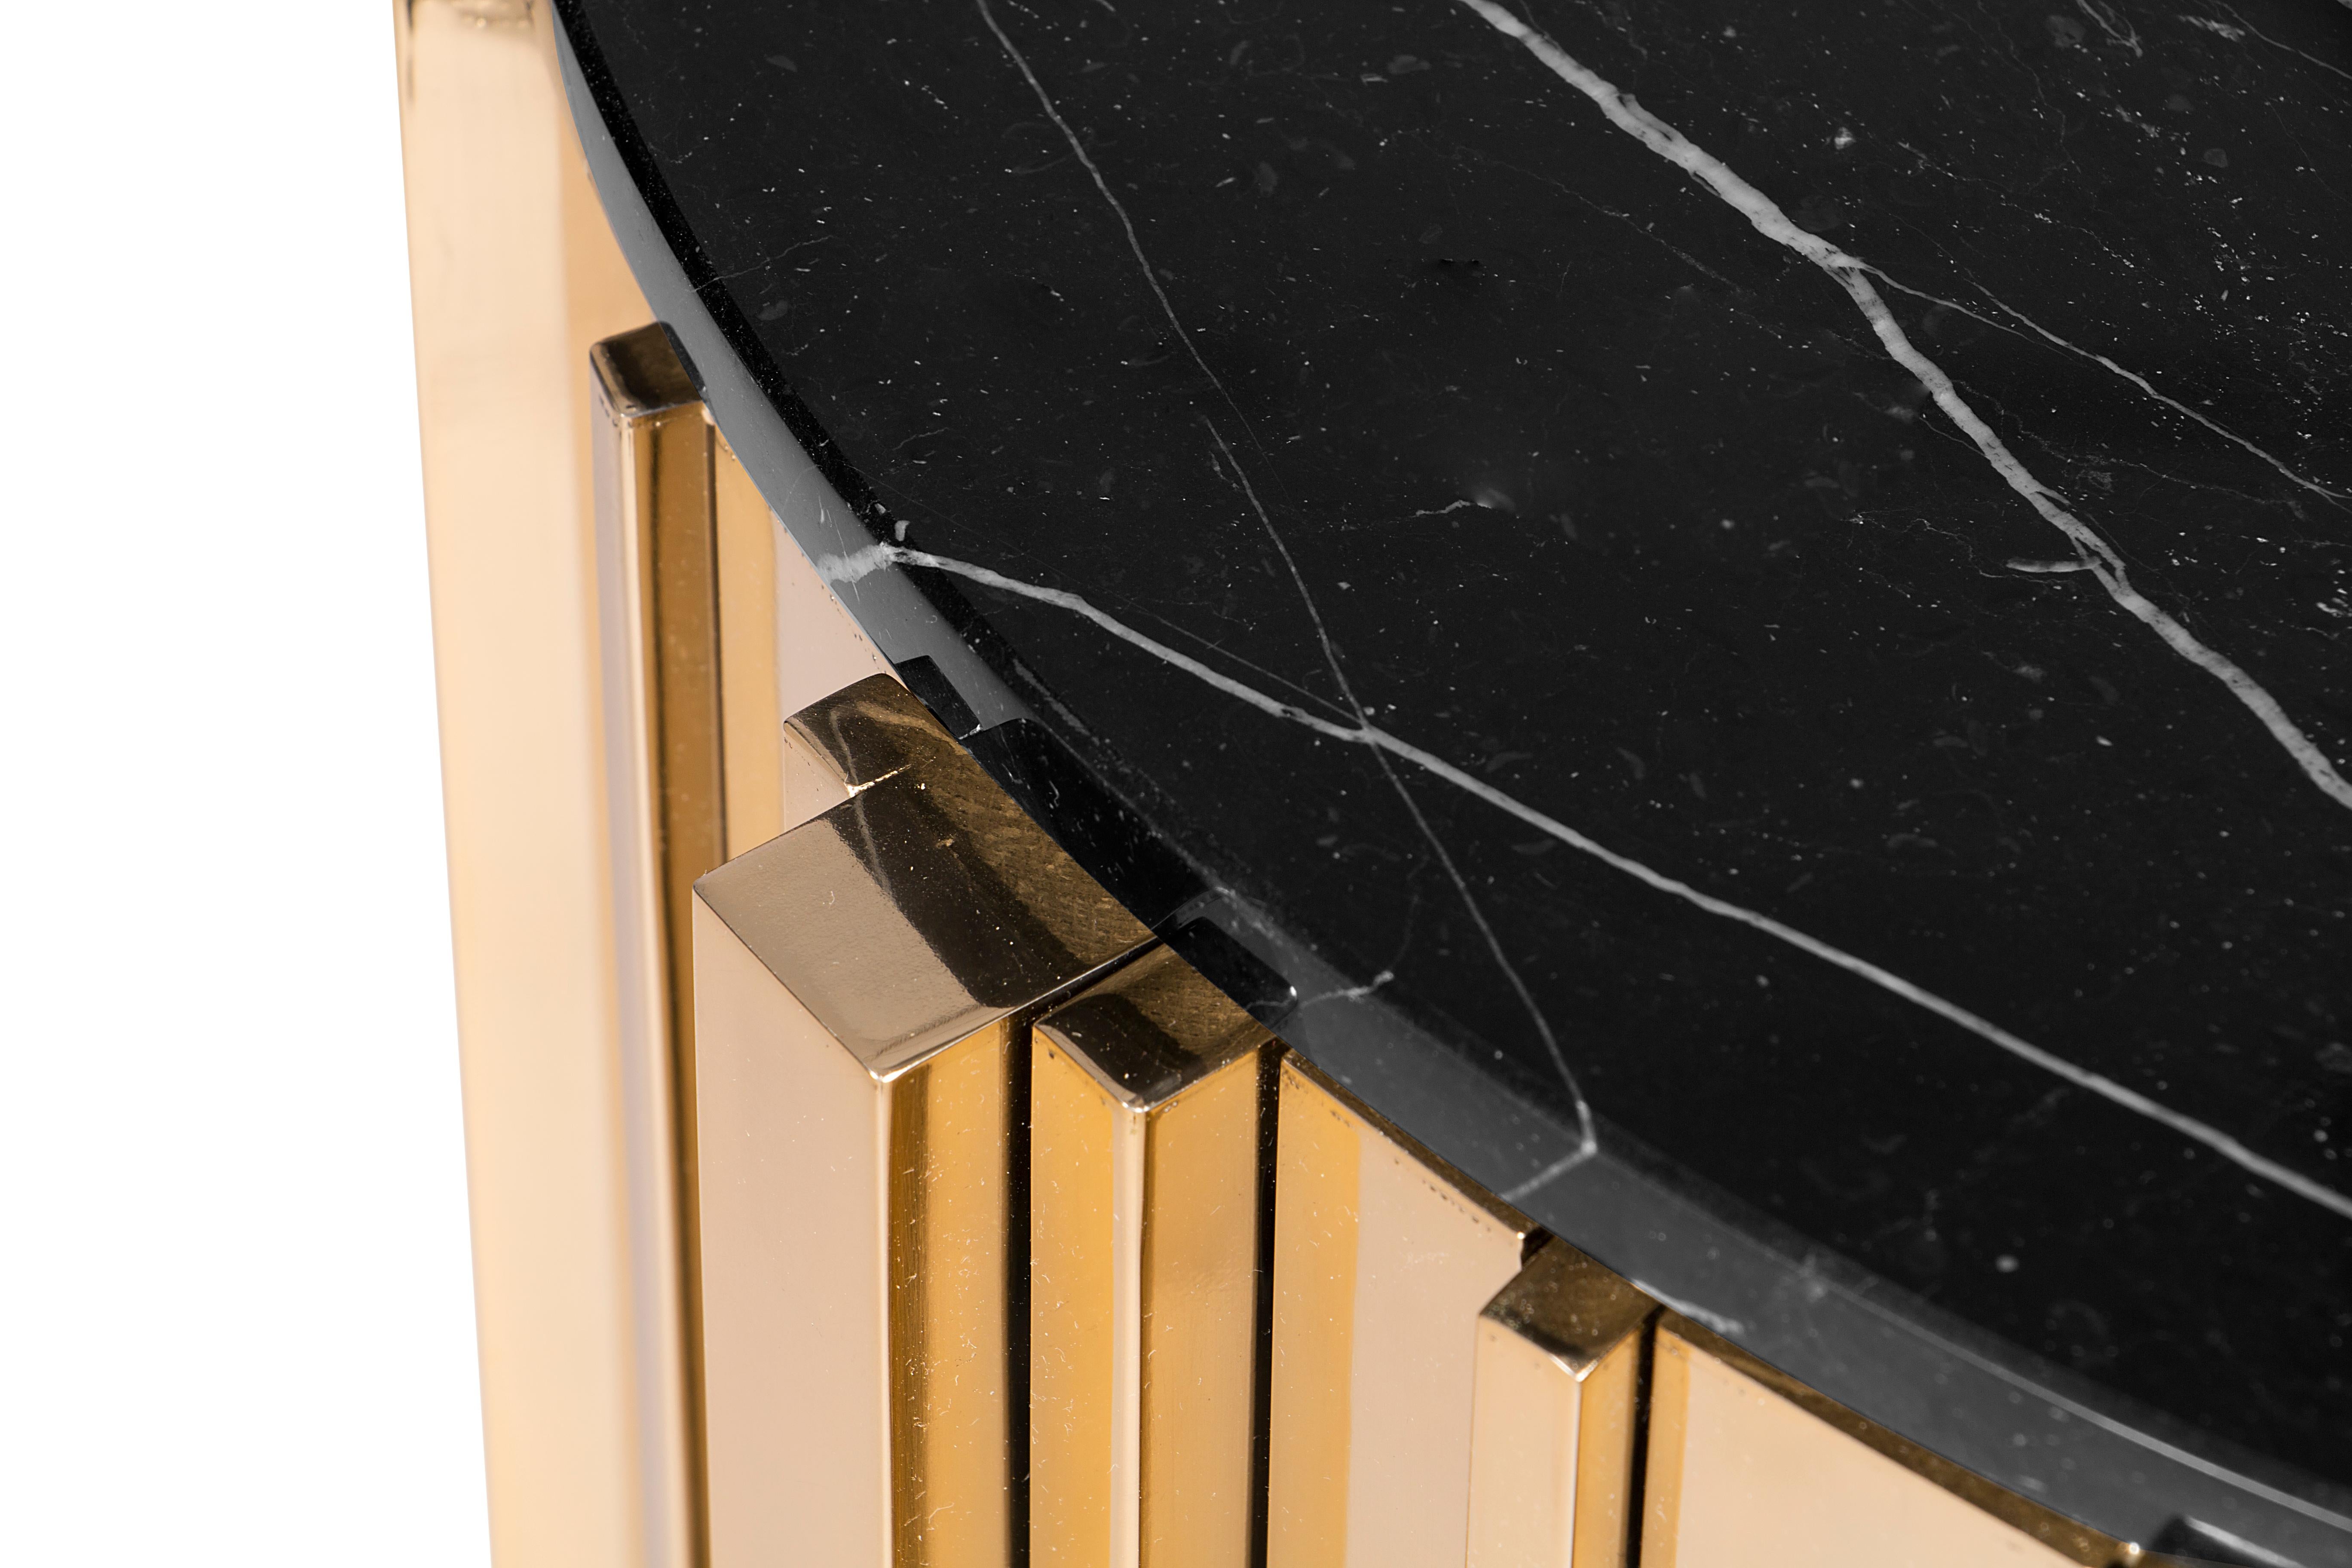 Made with the highest quality of brass and Nero marquina marble, Empire side table wins a new form. It’s a versatile item which gives a sophisticated ambiance to any setting, from living room to an entrance or a bedroom.
Materials: brass base and